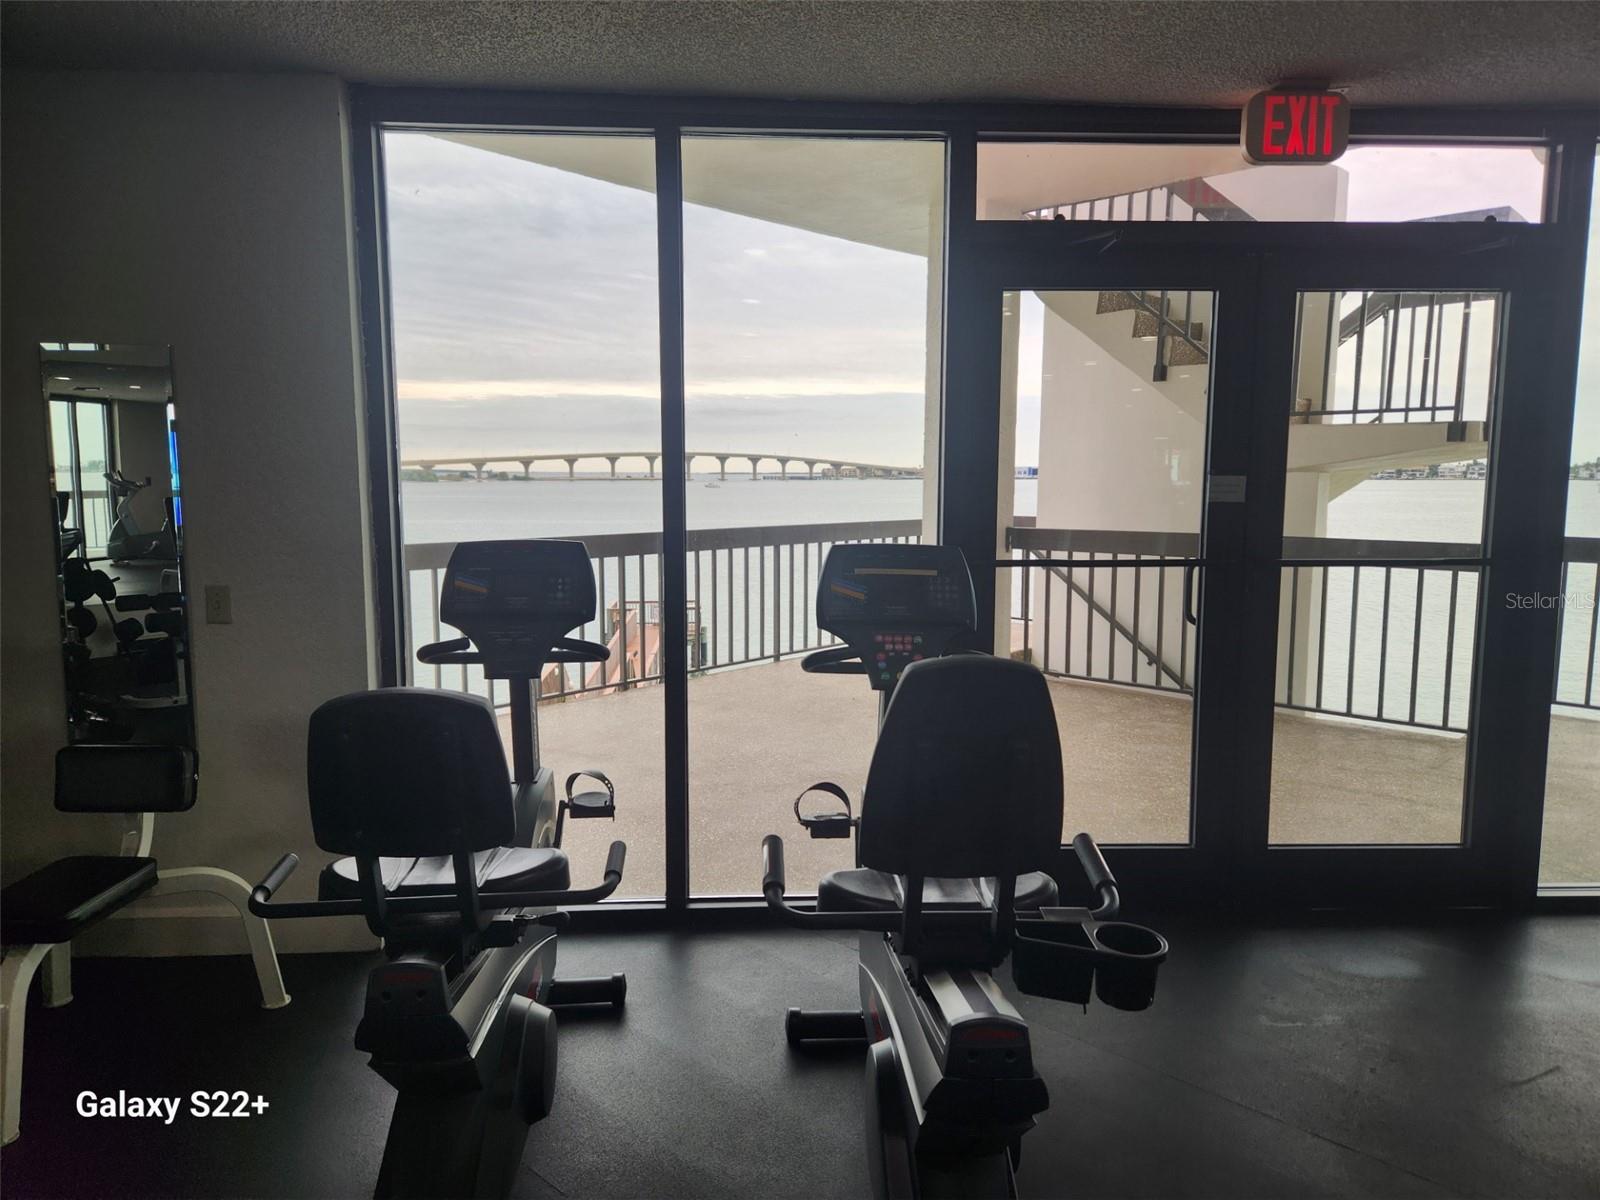 Gym has a view of the water while working out.